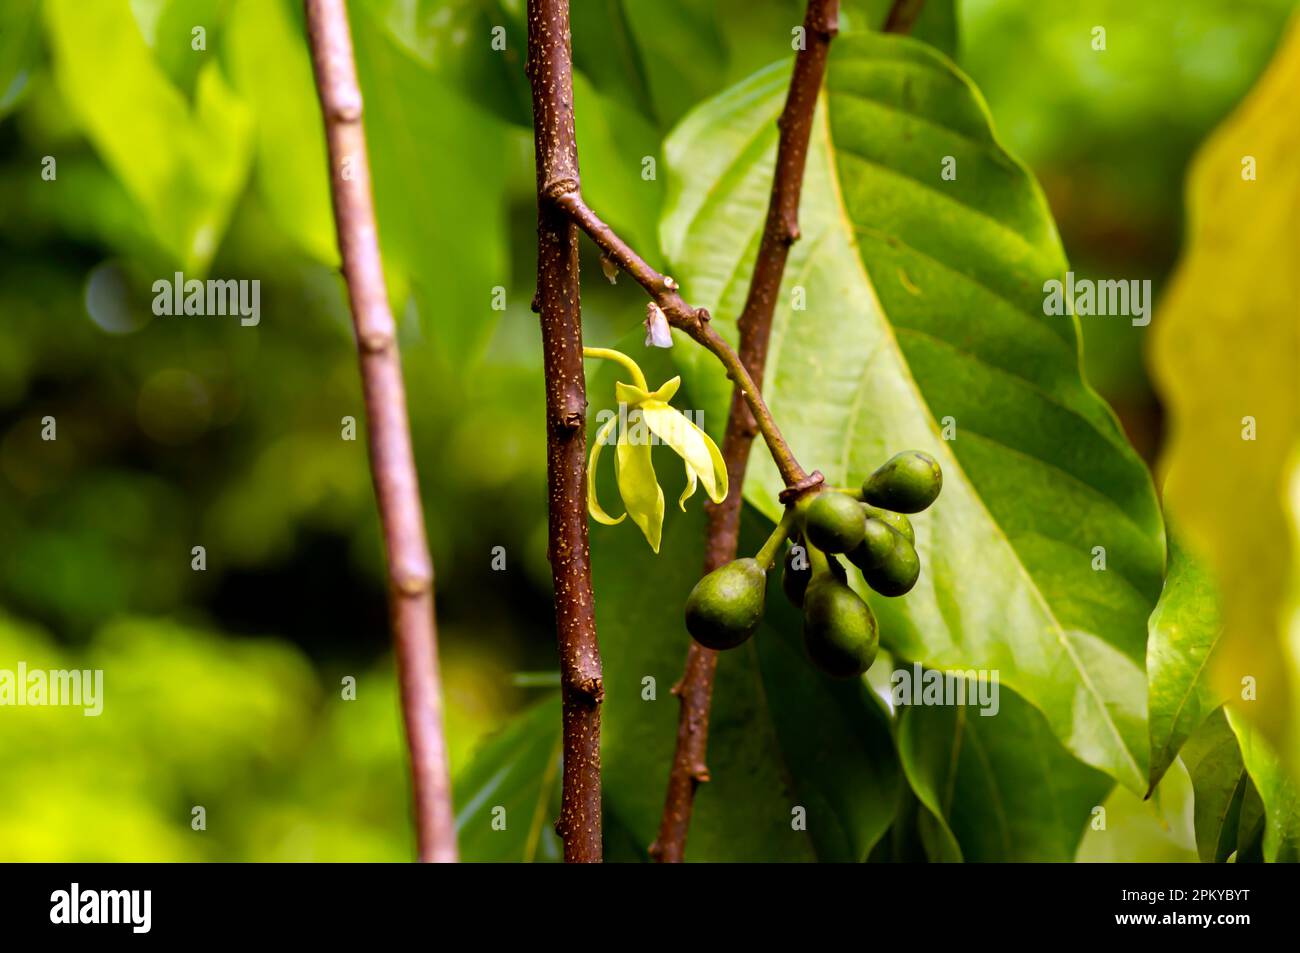 Cananga odorata flowers and seeds, known as the cananga, selected focus Stock Photo